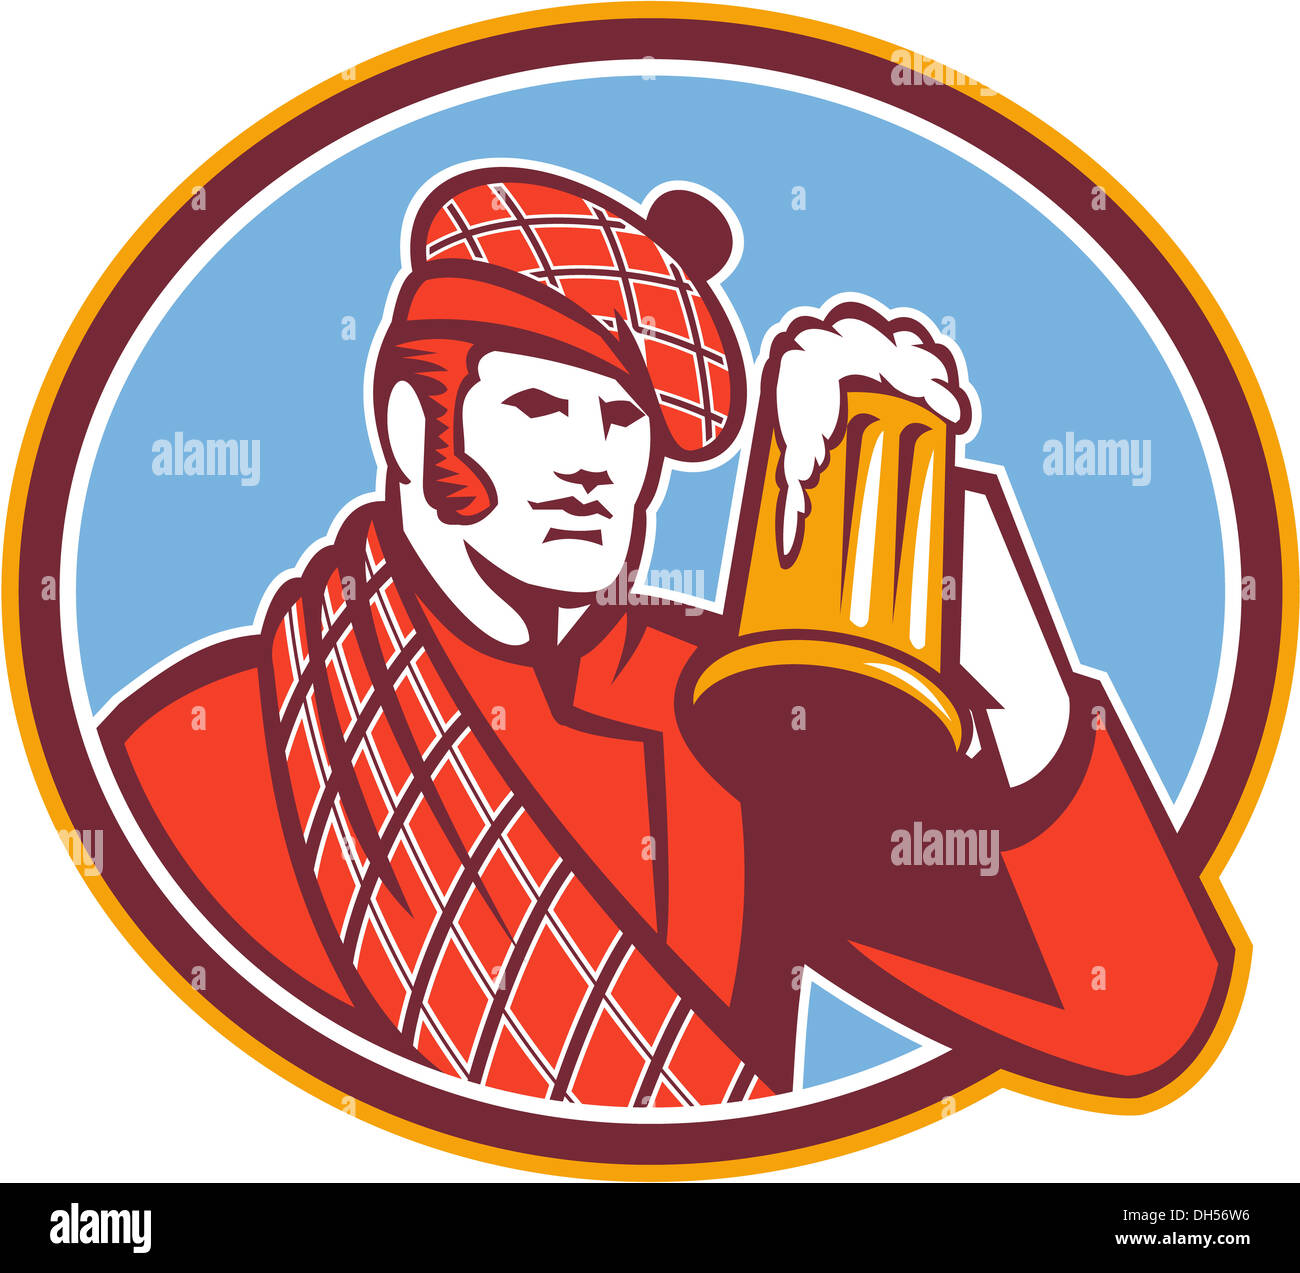 Illustration of a Scotsman Scottish beer drinker raising beer mug drinking looking up wearing tartan and beret hat set inside oval done in retro style. Stock Photo